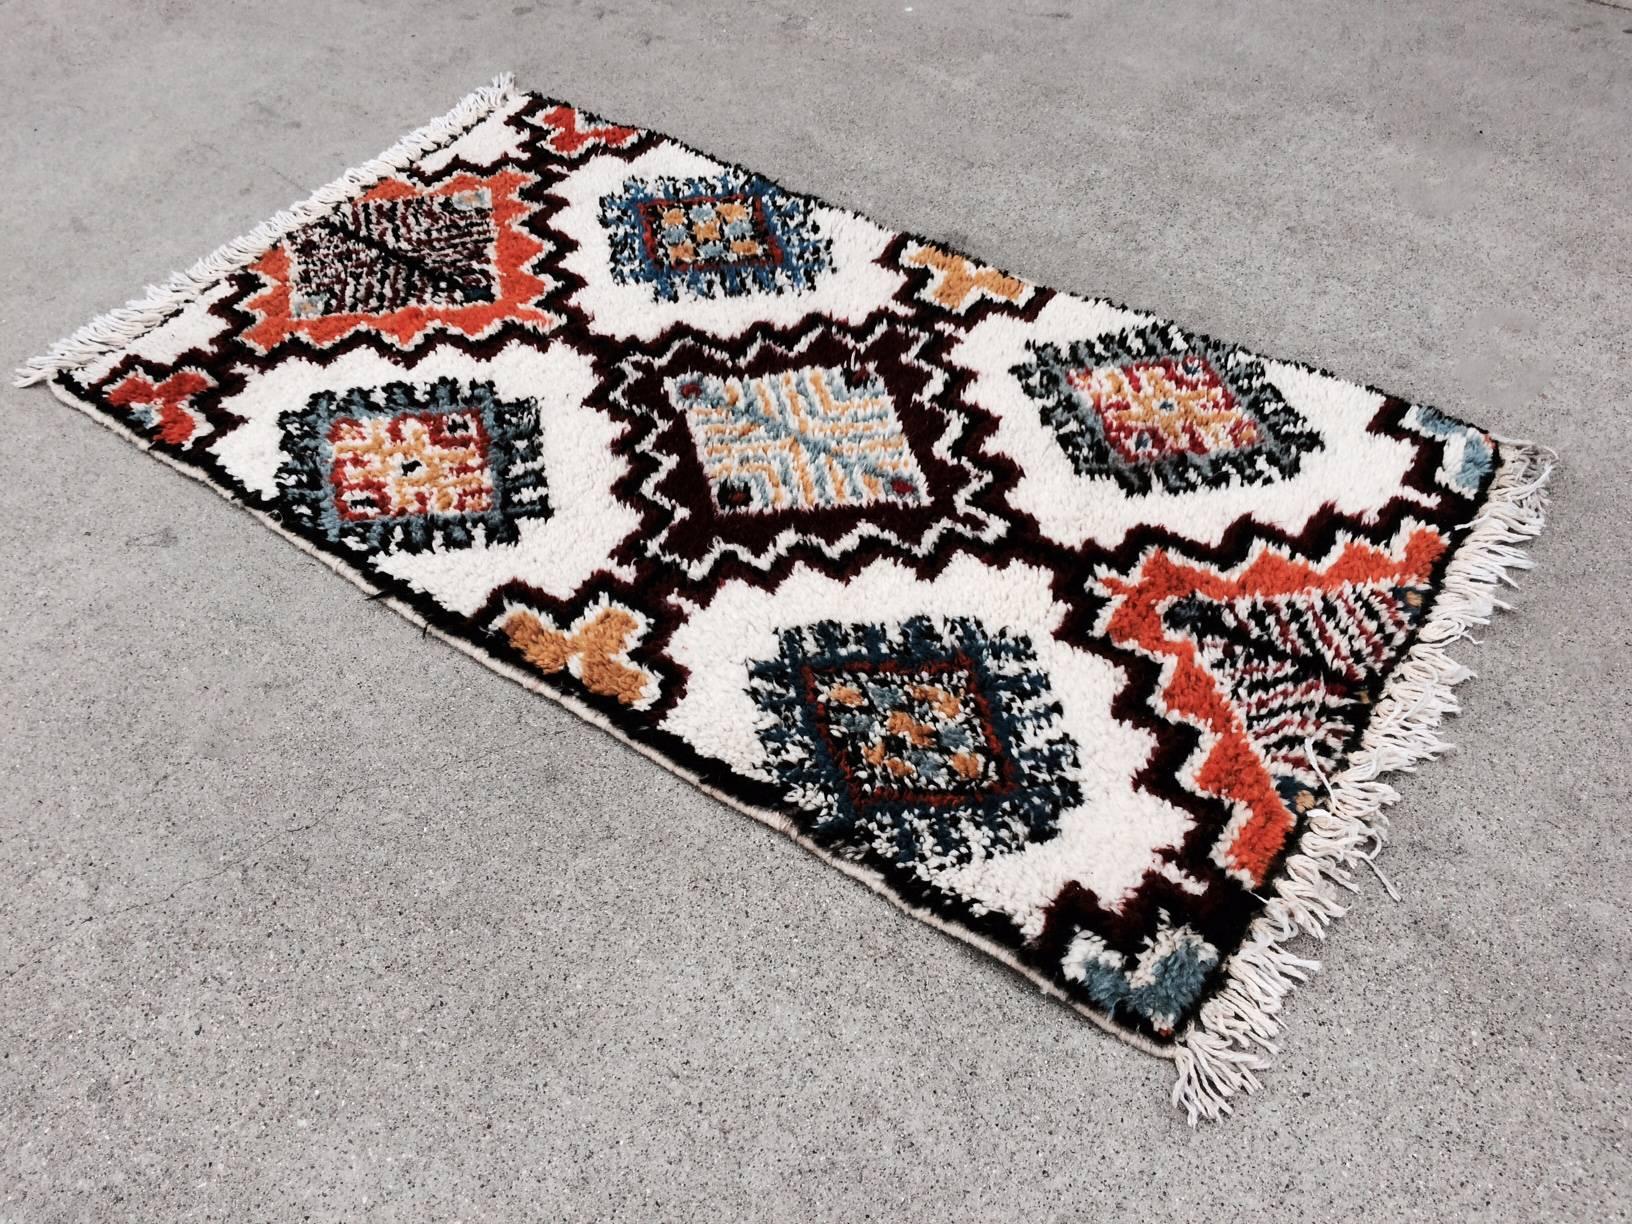 This Moroccan shag wool rug has a geometric pattern in a palette of predominately orange and blue complimentary colors and contrasting black and white line and space. The tapestry has its original tag from Rabat in Morocco. It is dated 1977.